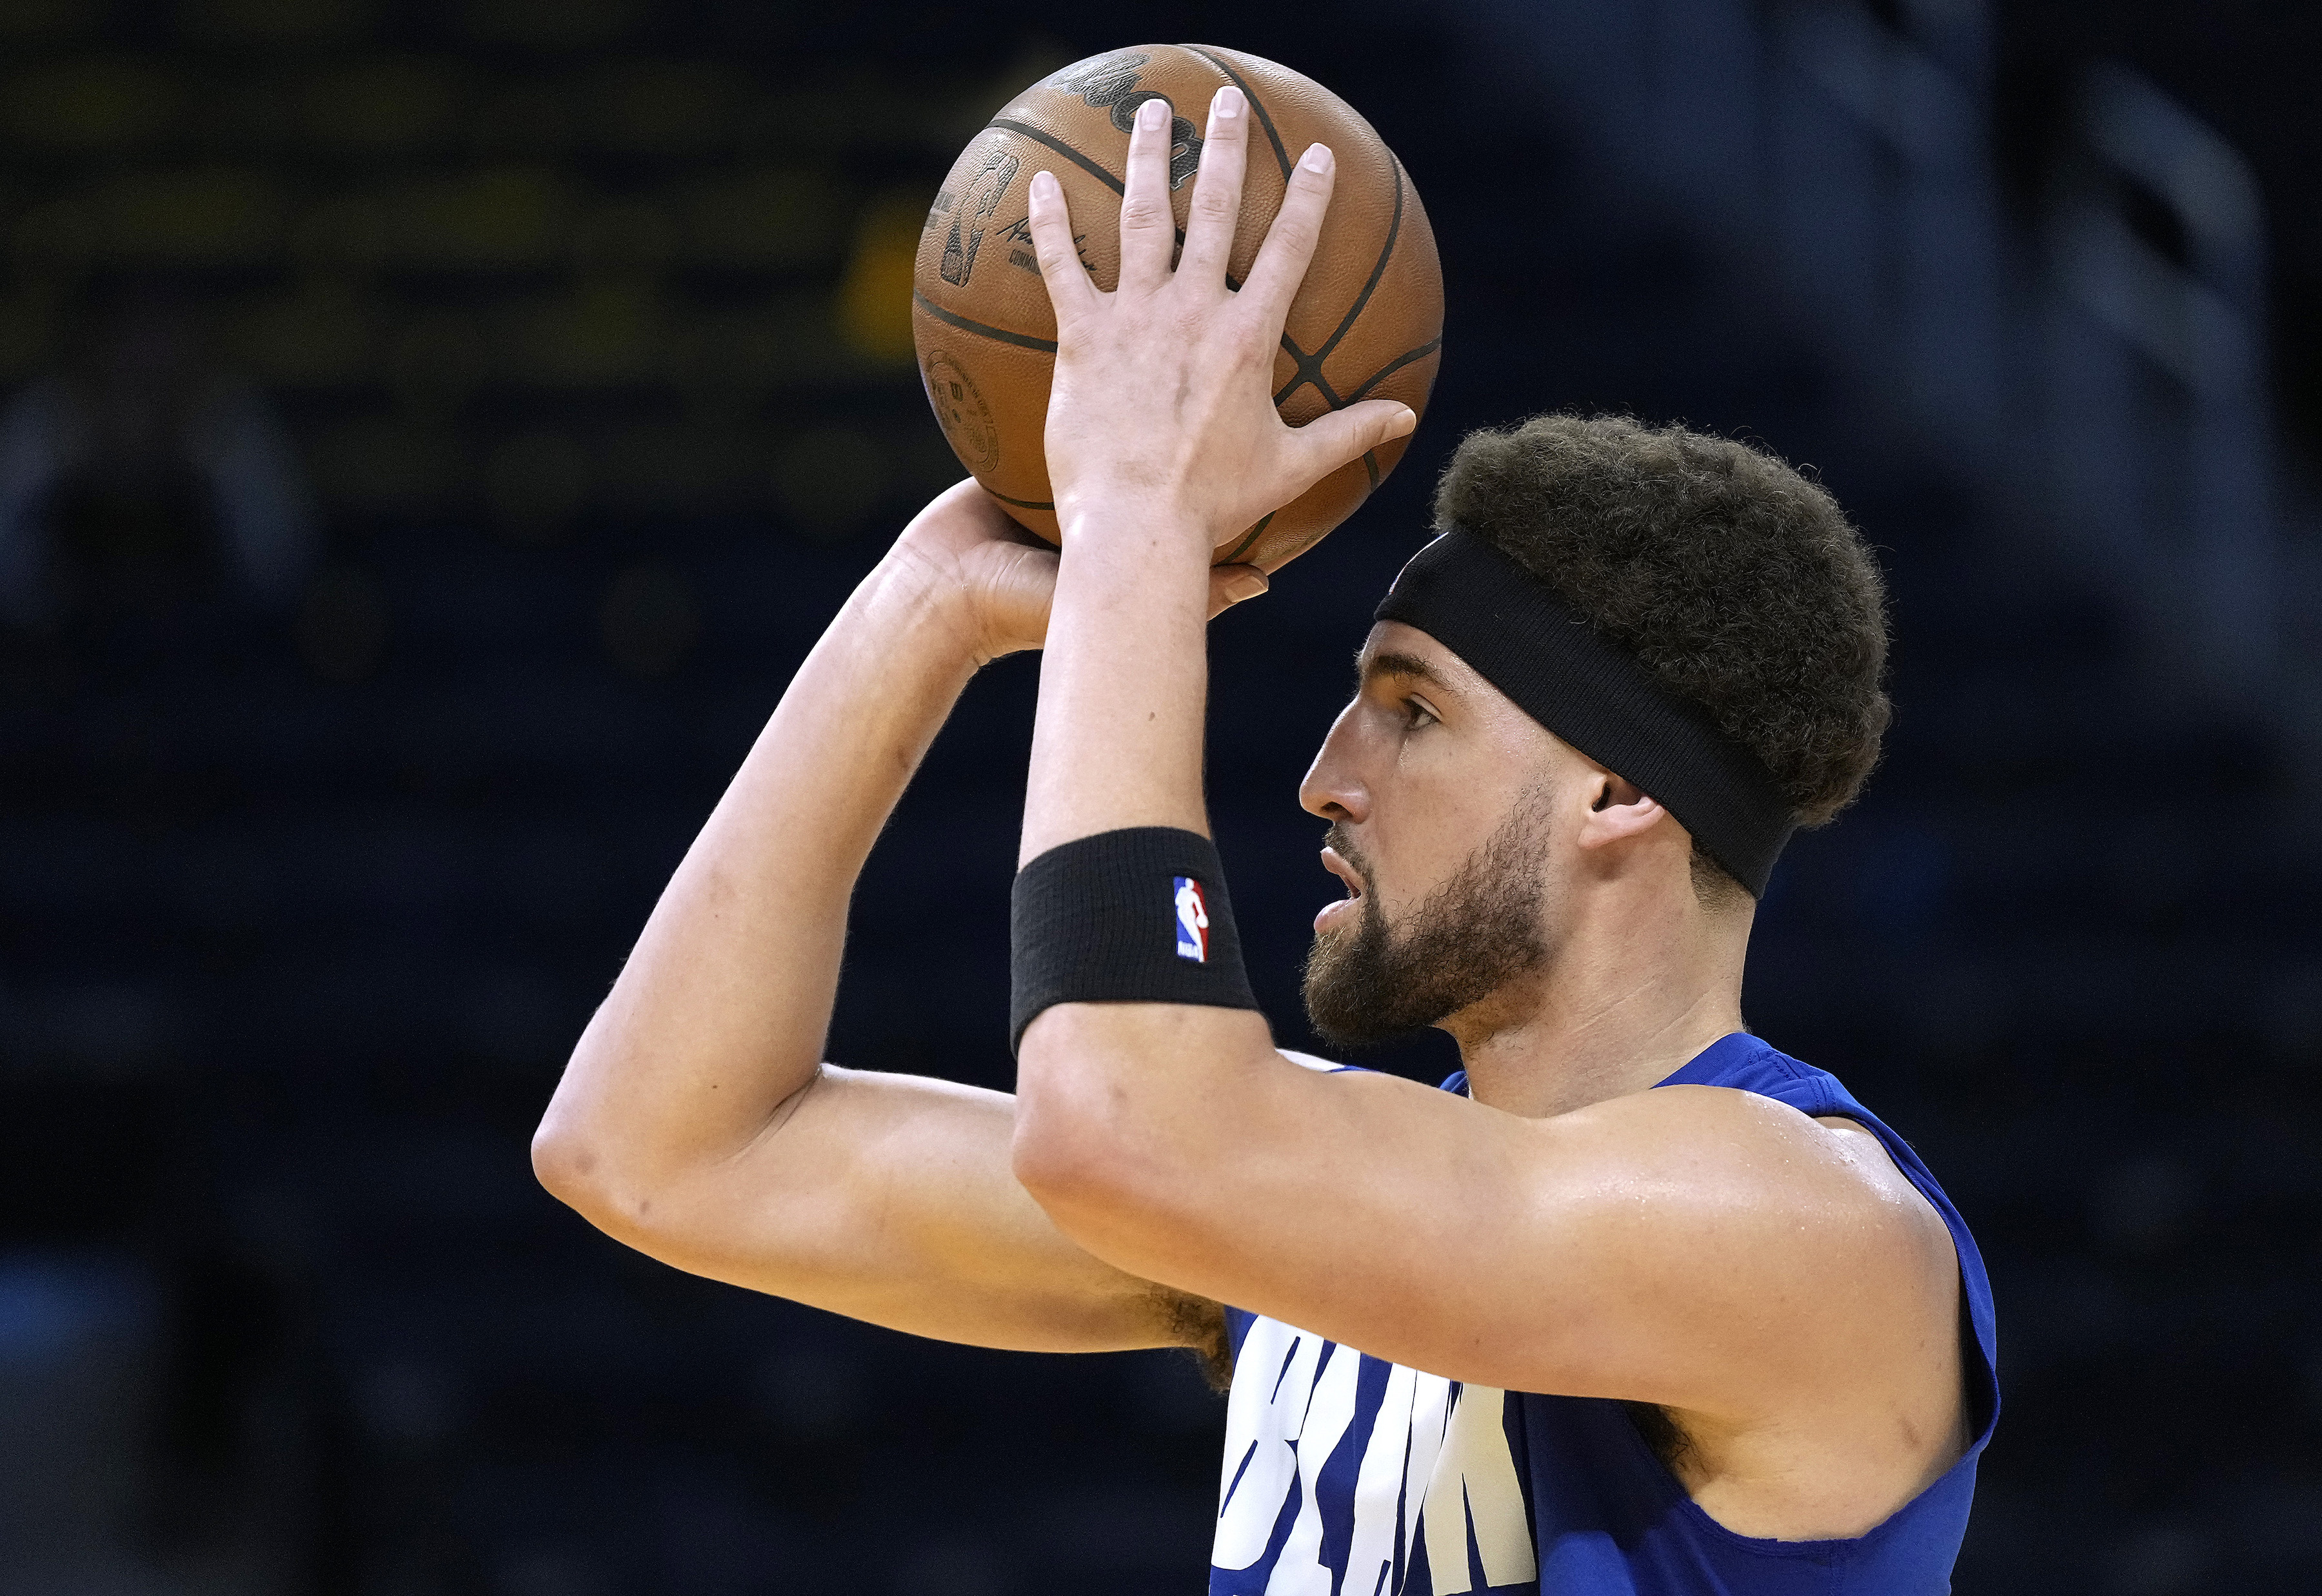 Golden State Warriors guard Klay Thompson warms up before an NBA game against the Denver Nuggets in February 2022